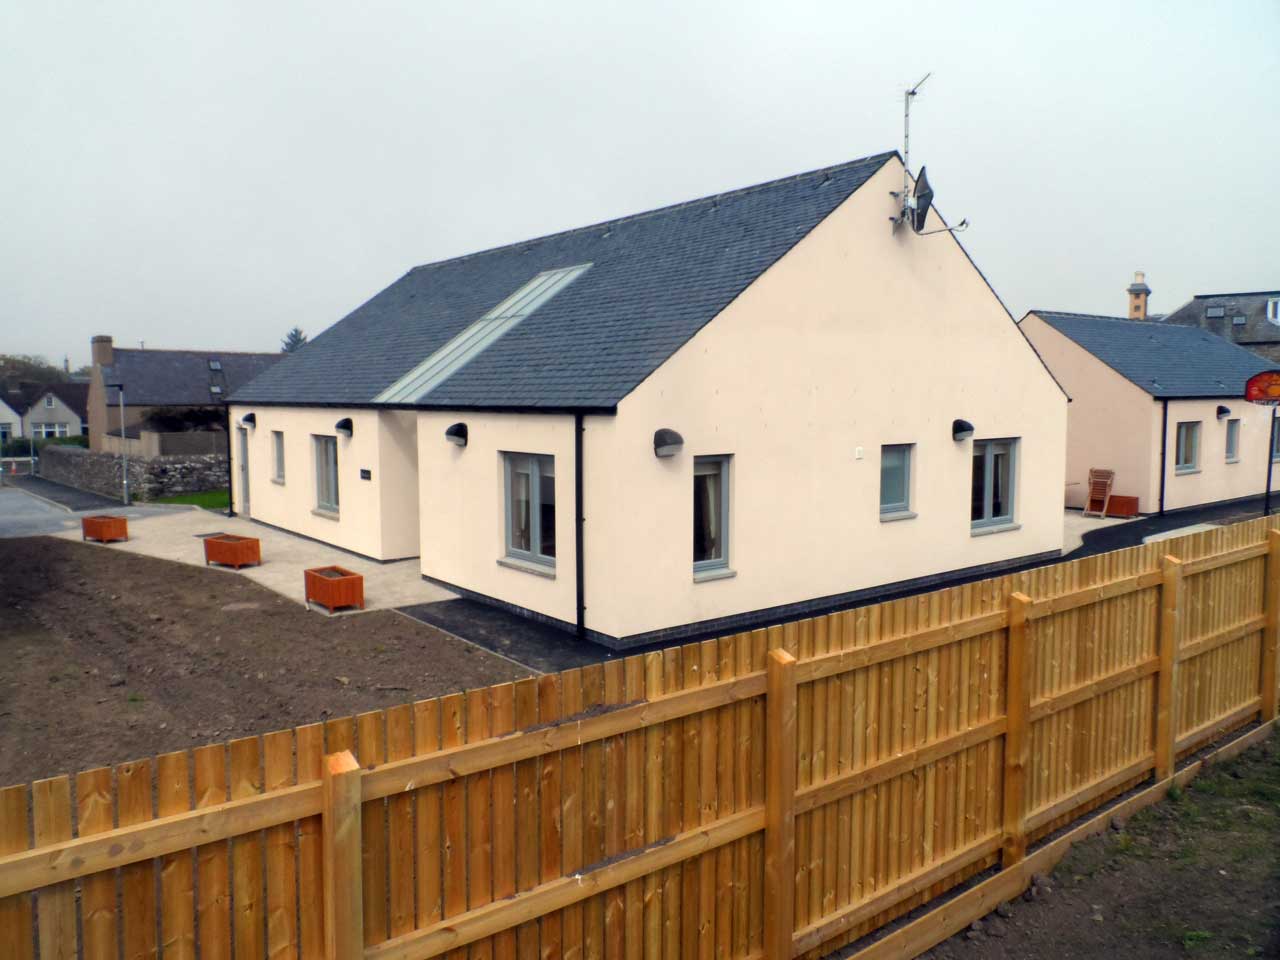 Photo: New Children's Home In Wick 31 May 2014